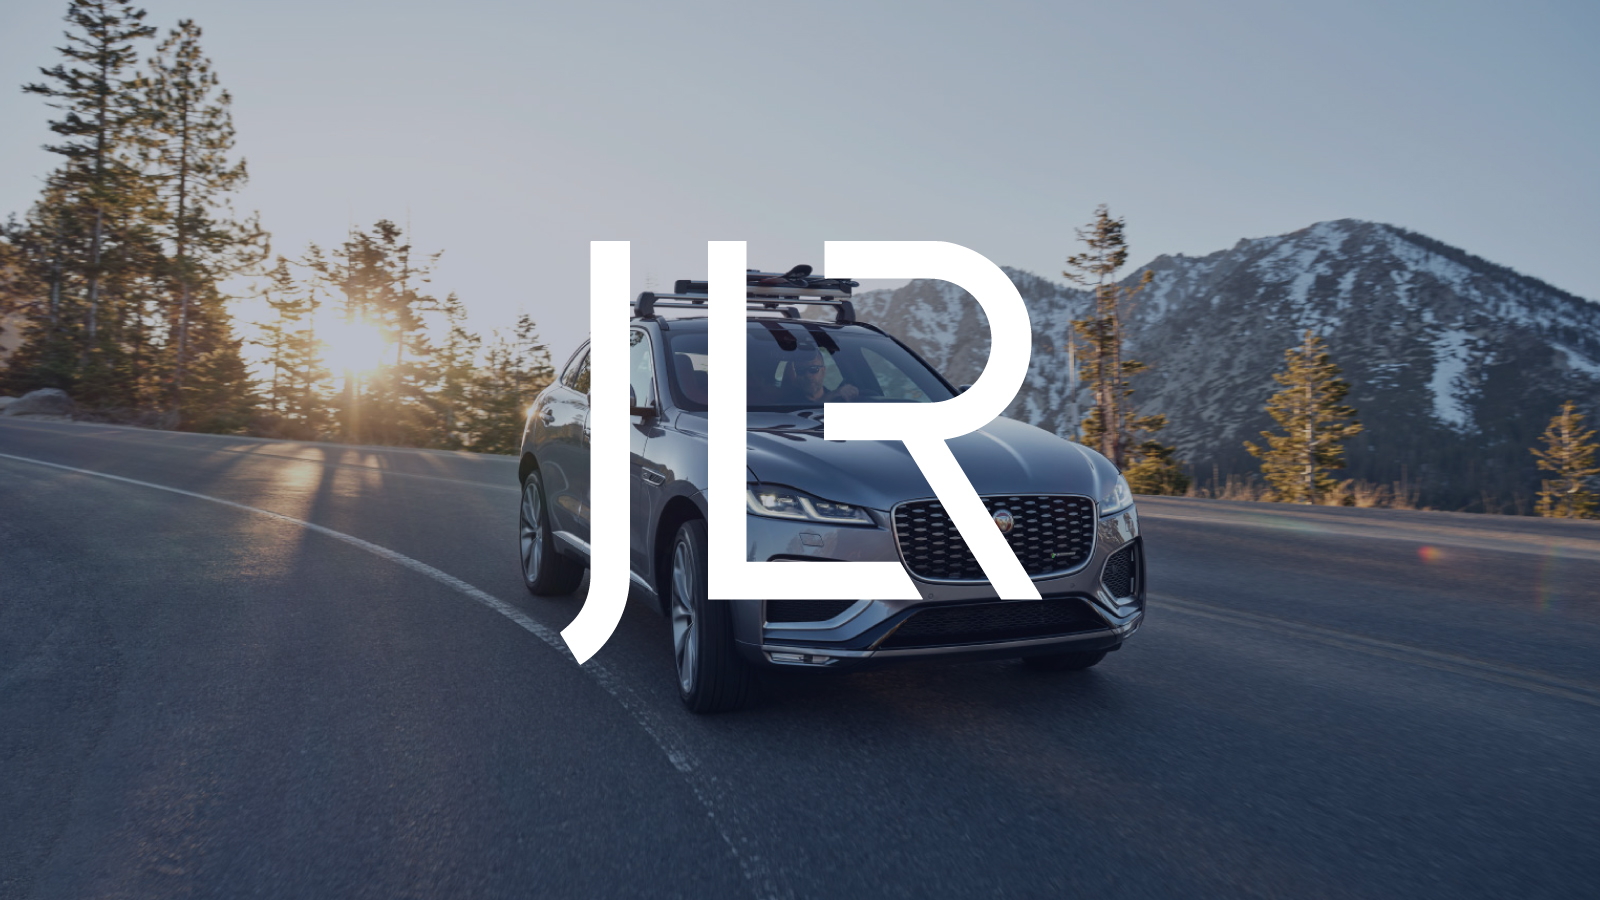 Graphic: JLR logo over Jaguar SUV driving on an open road